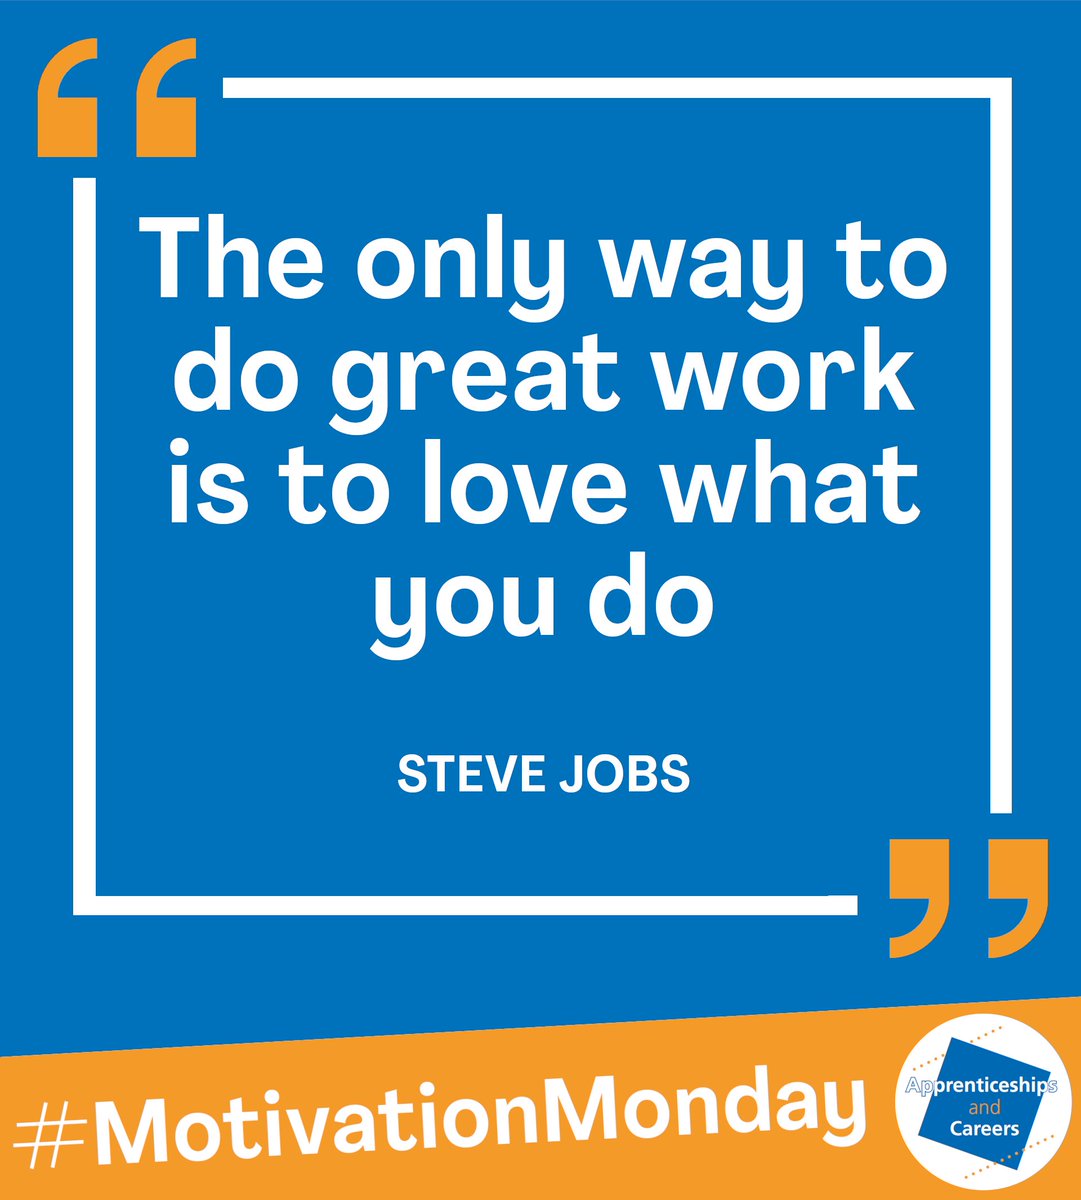 Good morning @GH_apprentices family!  

It's that time again for some more #Mondaymorning #motivation!  

#MotivationMonday #CareersDay #CareersFamily #SkillsforLife